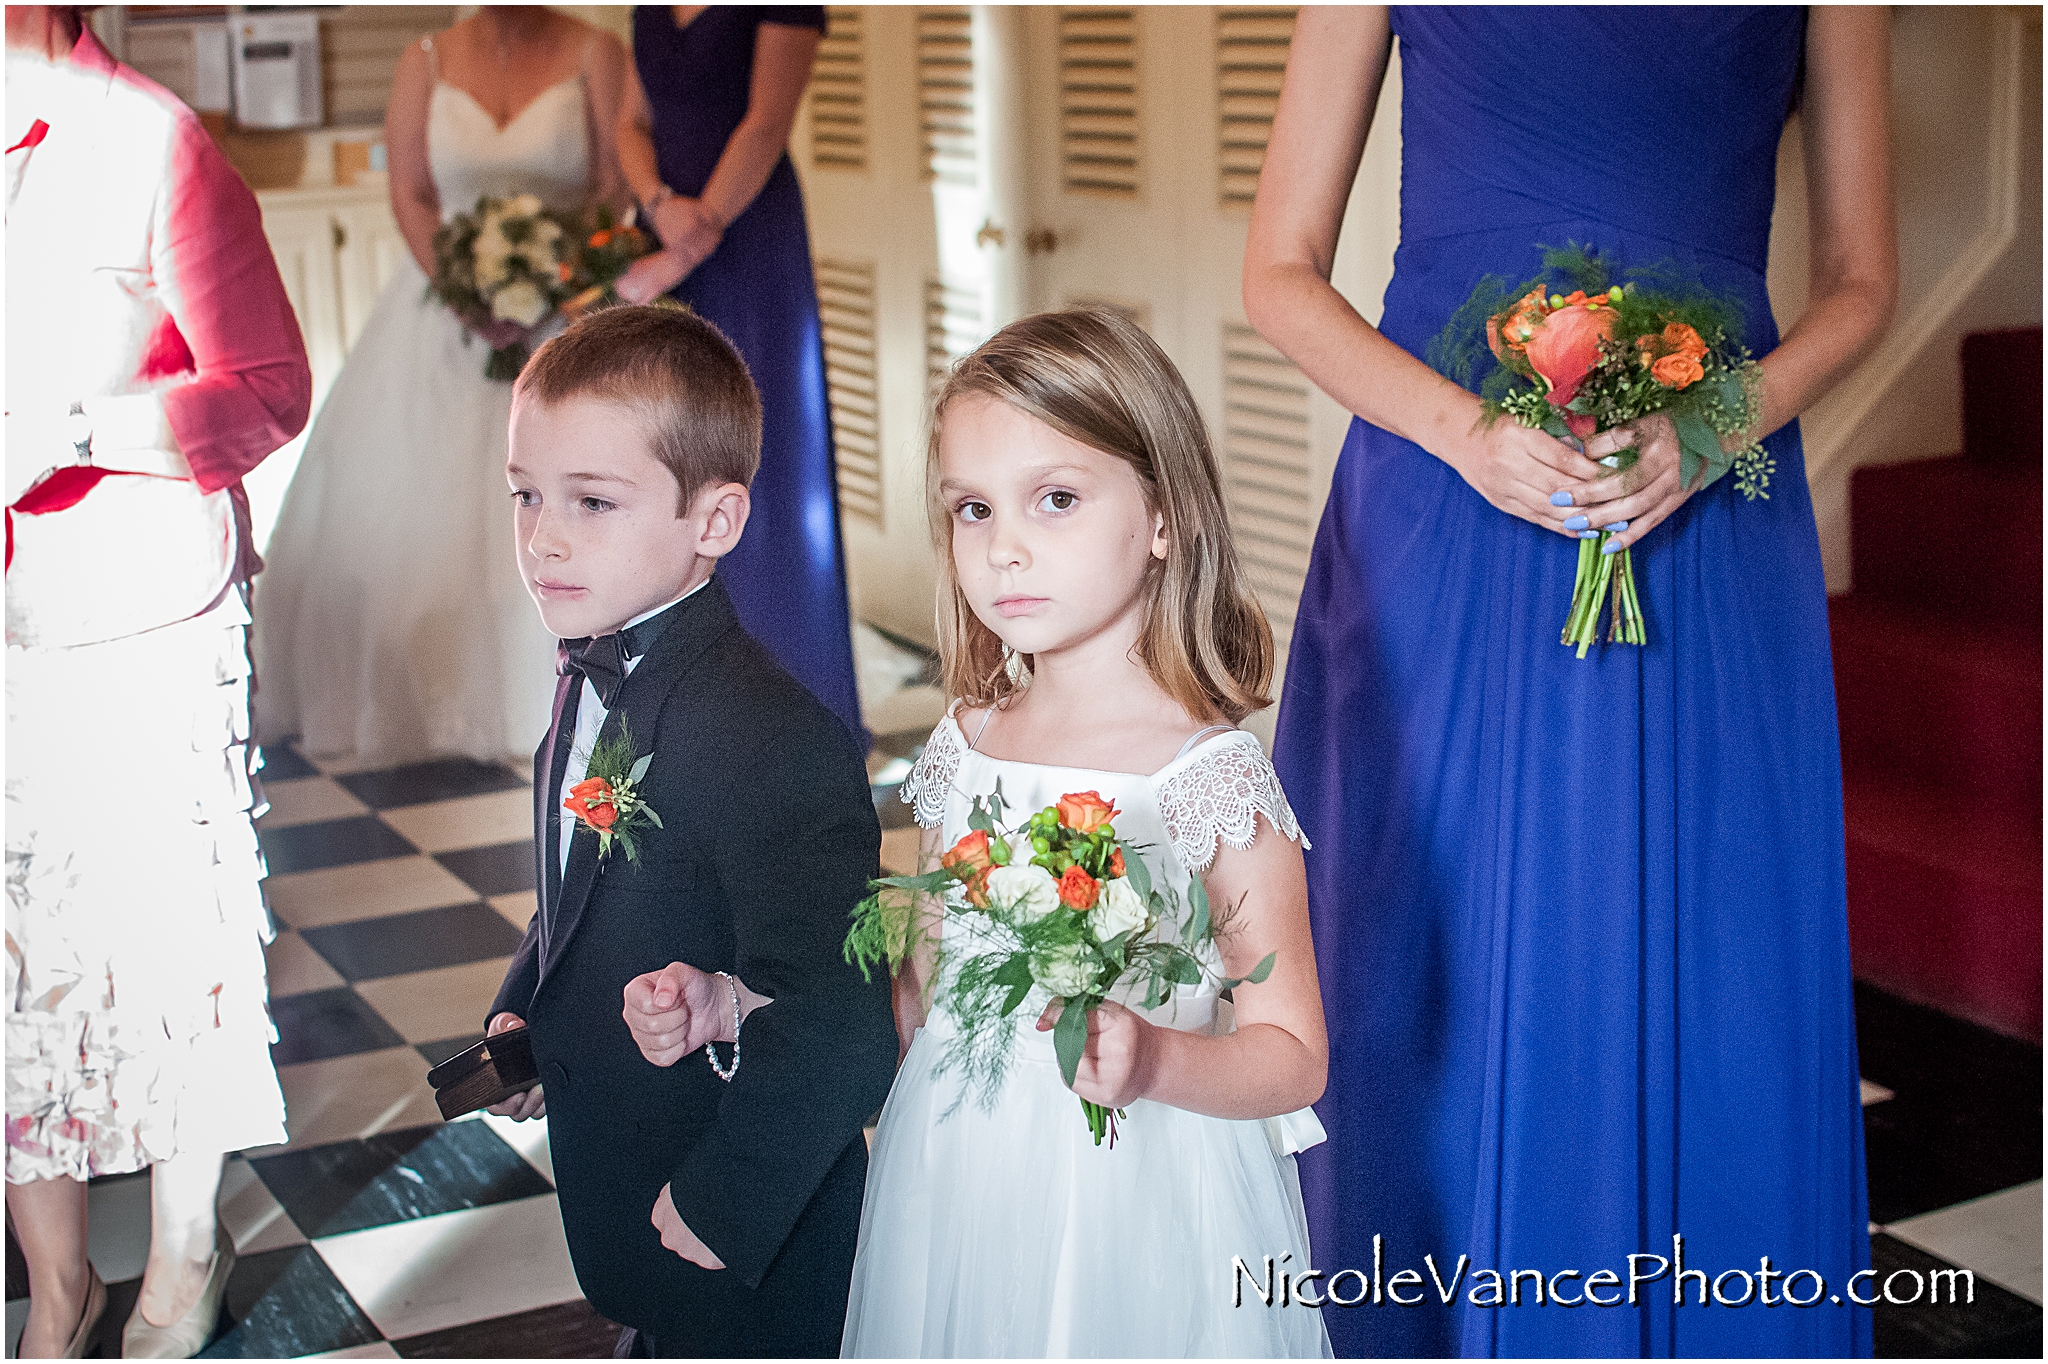 The flower girl and ring bearer prepare to go down the aisle for the wedding ceremony at Third Church.